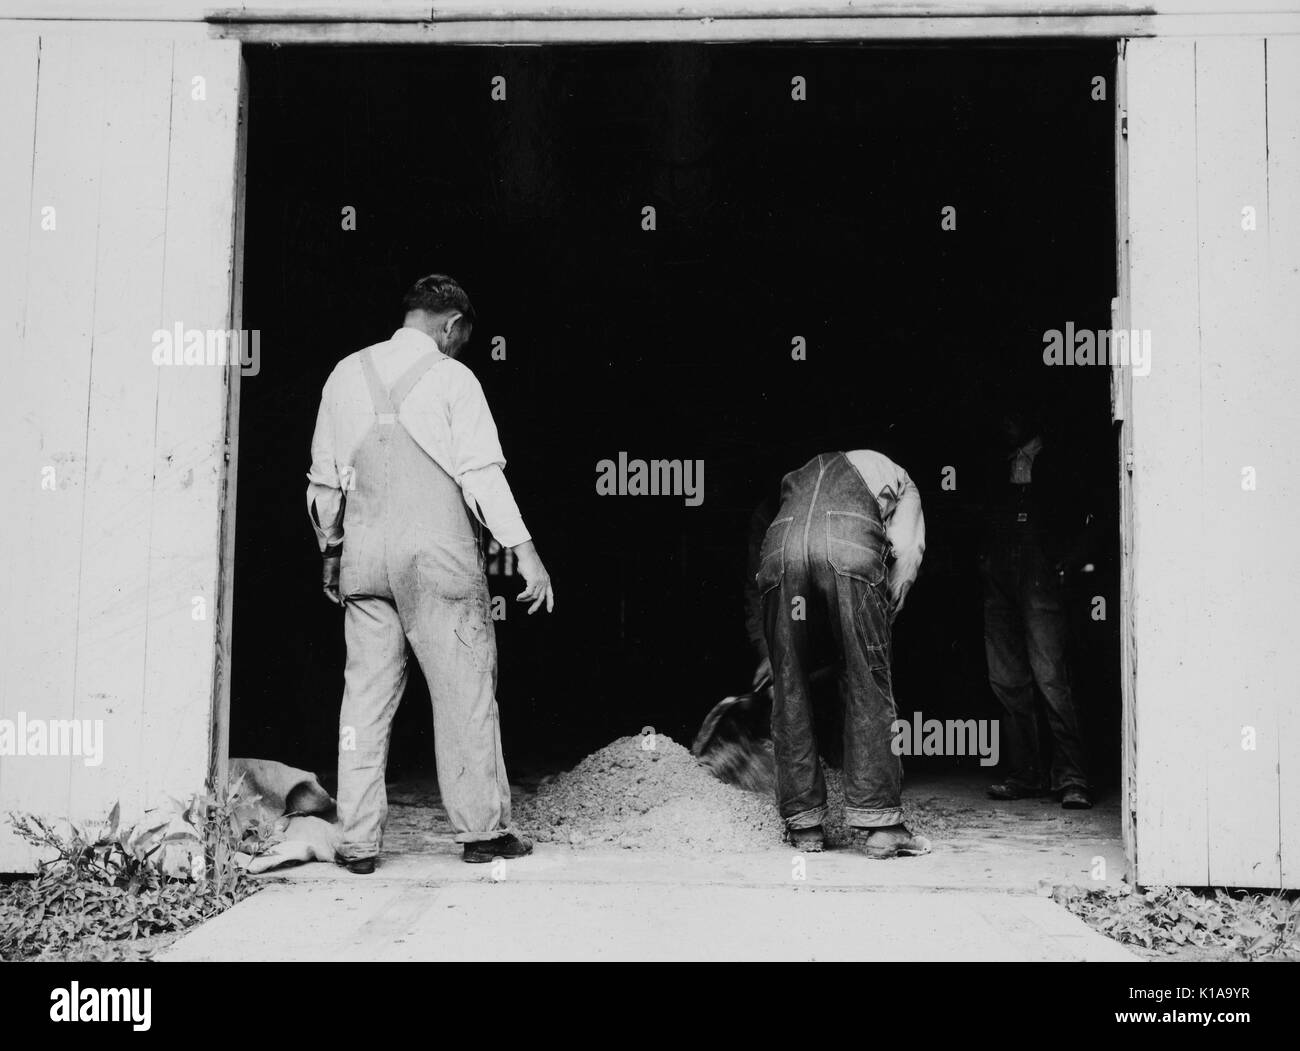 Two farmers work to mix grasshopper bait, while a county supervisor watches their work, Oklahoma City, Oklahoma, 1937. From the New York Public Library. Stock Photo